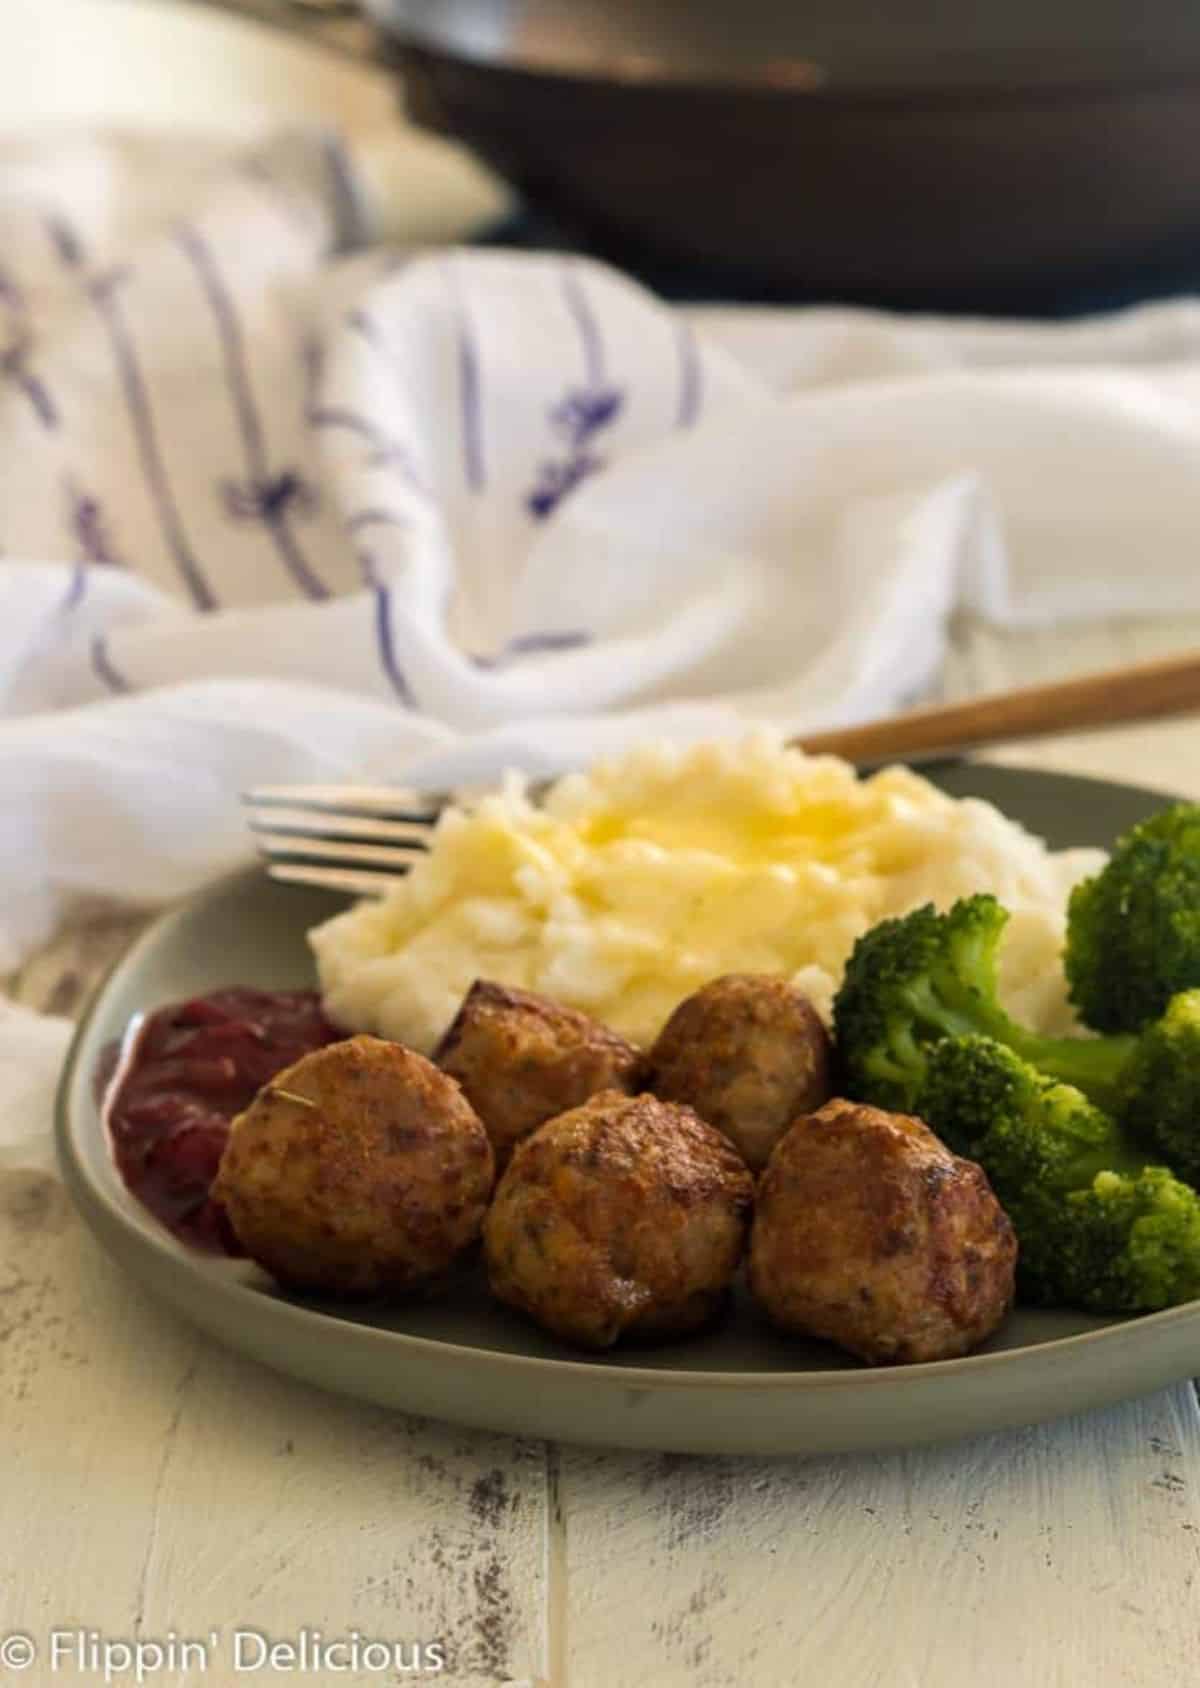 Scrumptious Gluten-Free Meatballs with mashed potatoes with broccoli on a gray plate.